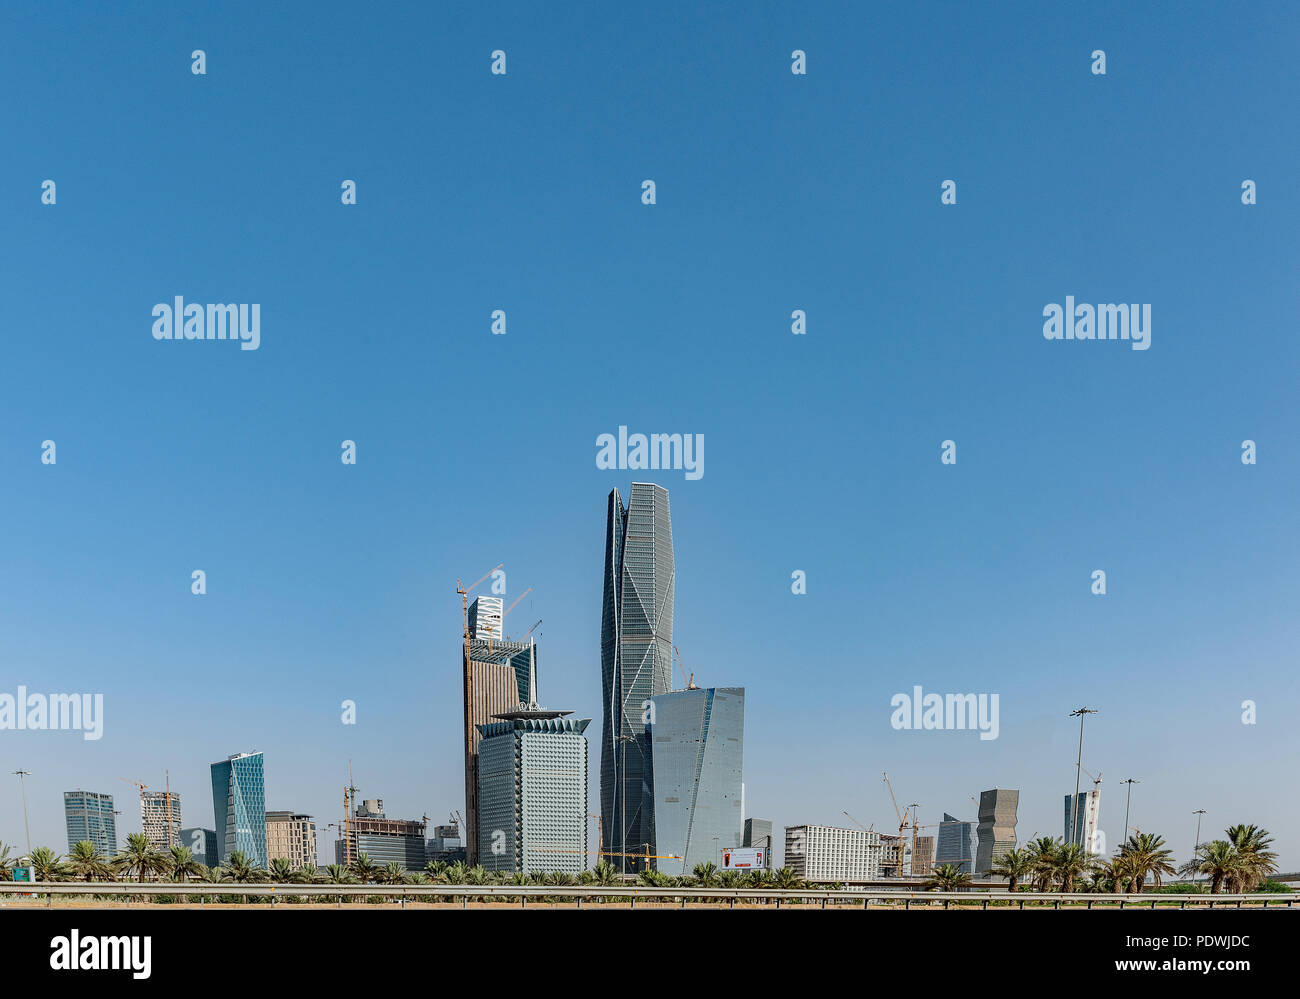 A wide view of KAFD - King Abdullah Financial District - in Riyadh, Saudi Arabia. A huge construction project for a new financial district. Stock Photo